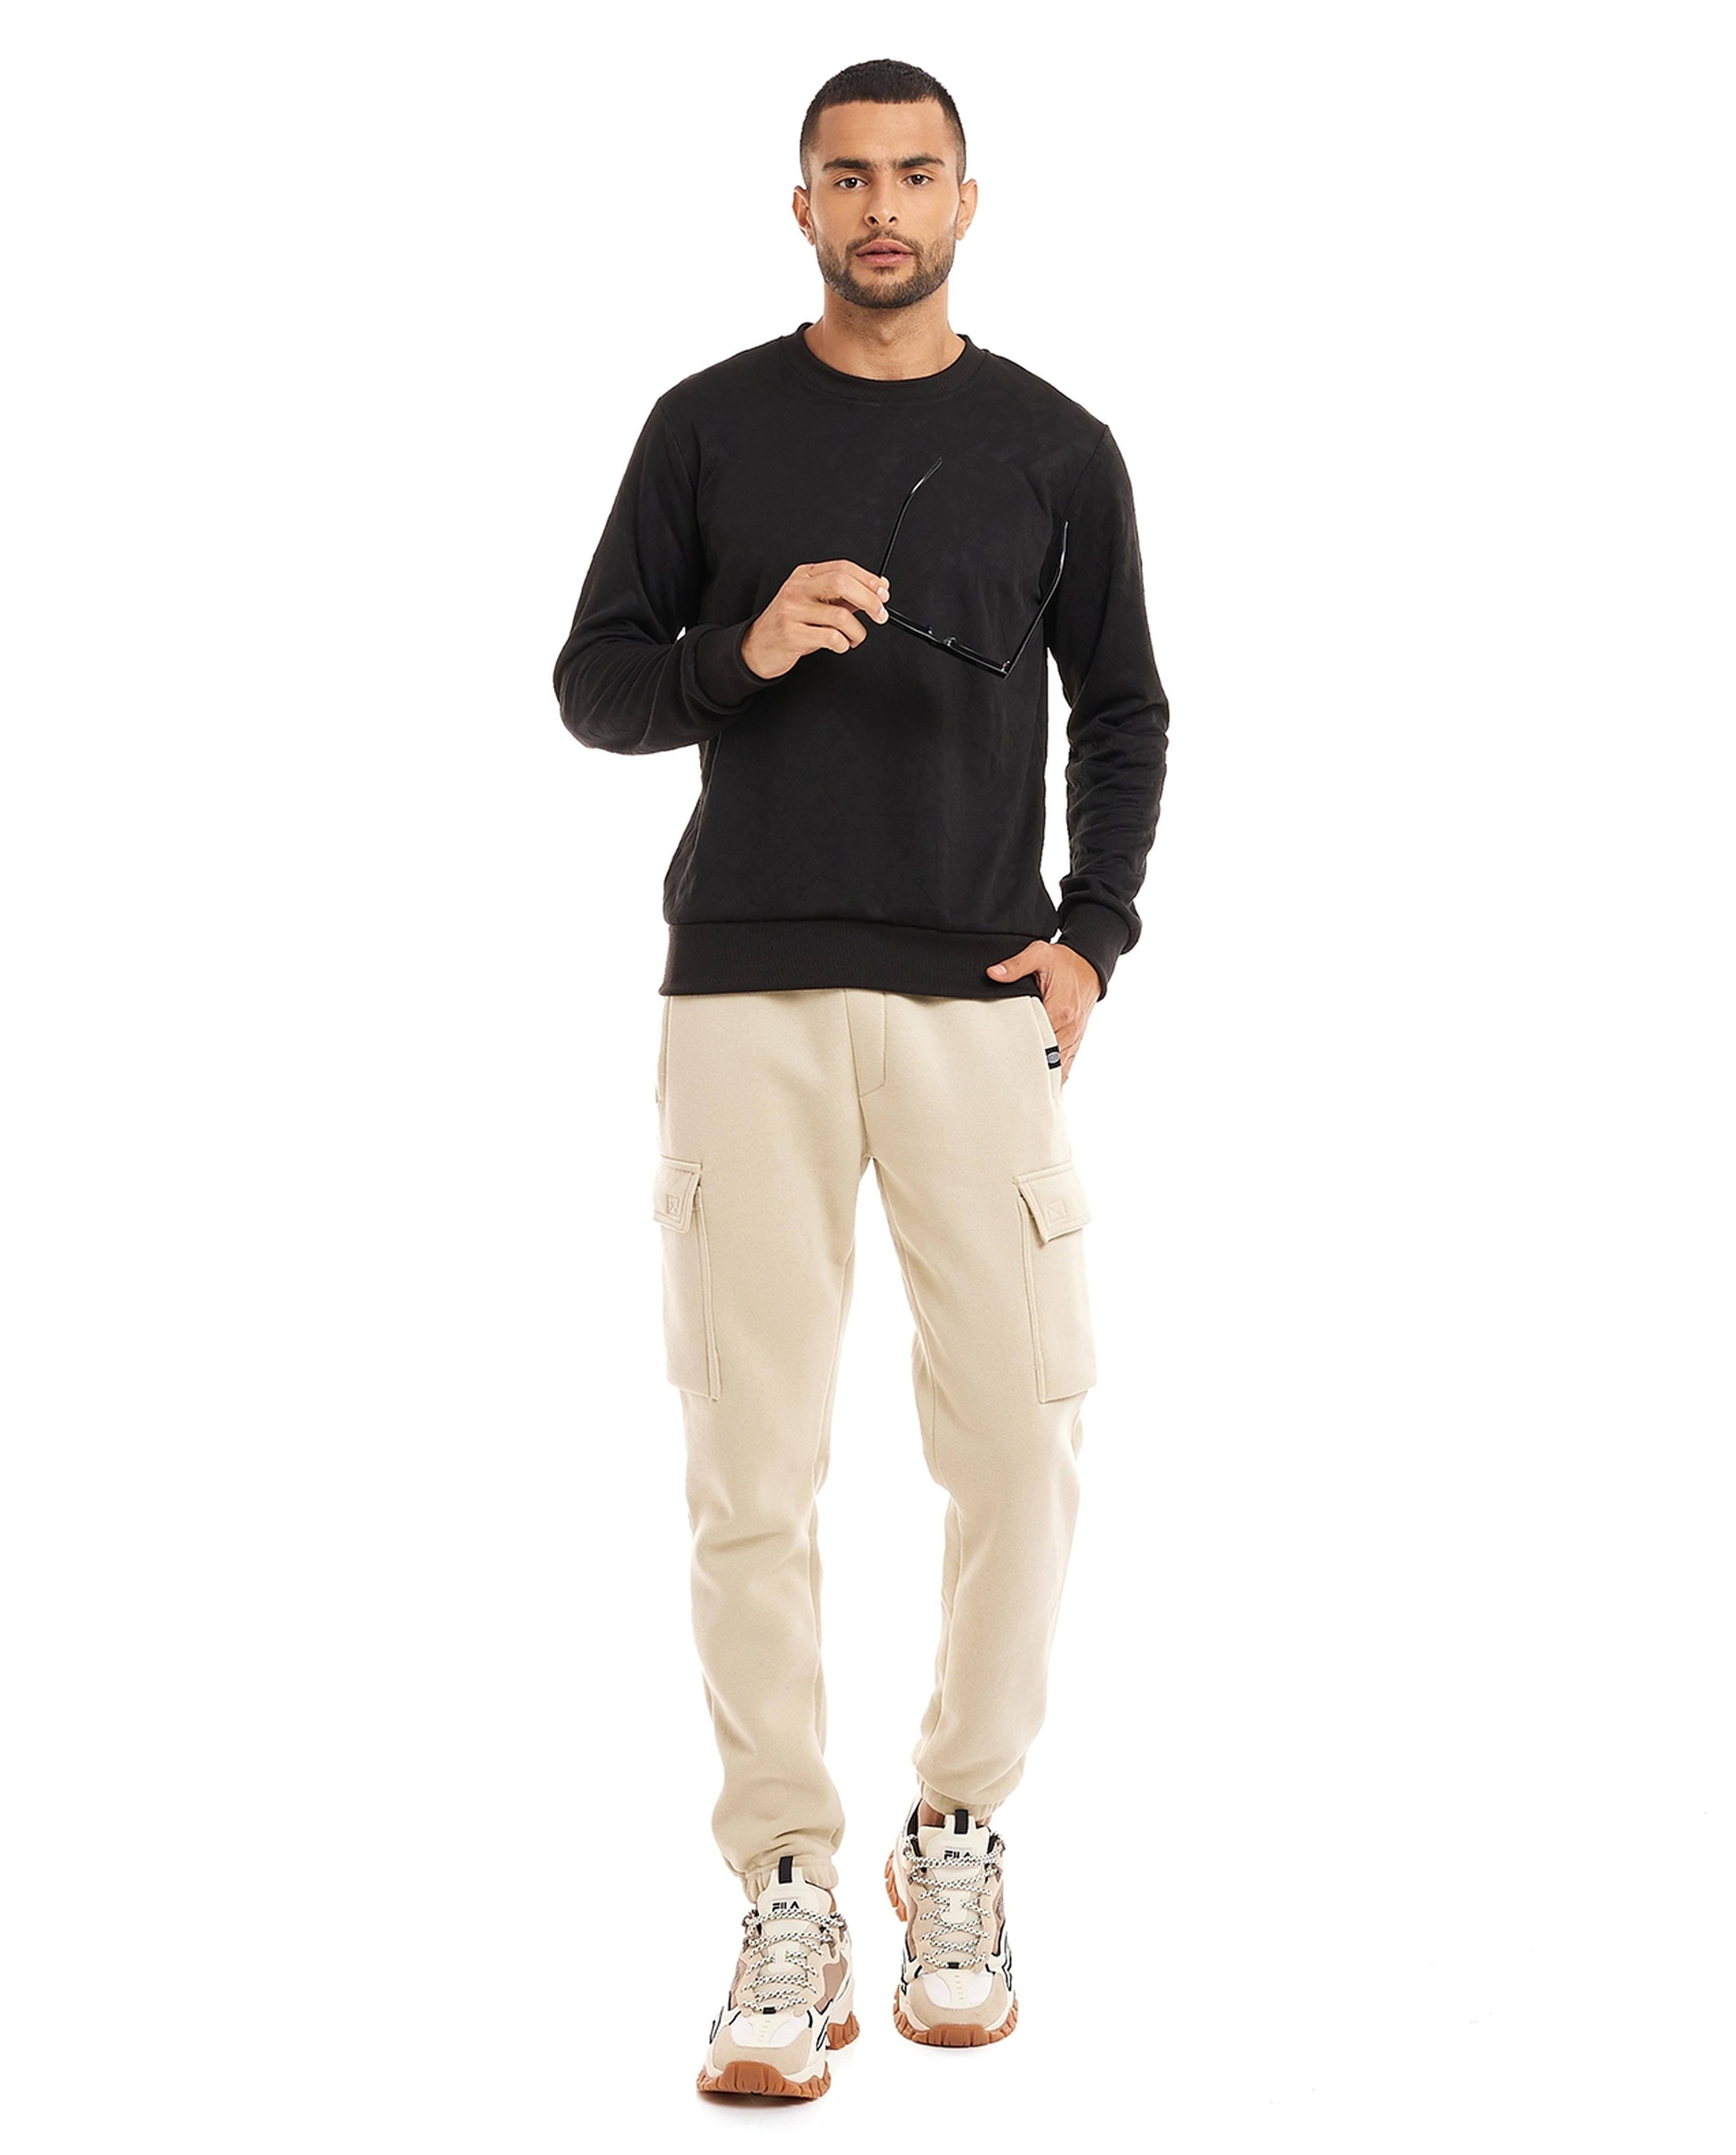 Self Patterned Sweatshirt with Crew Neck and Long Sleeves